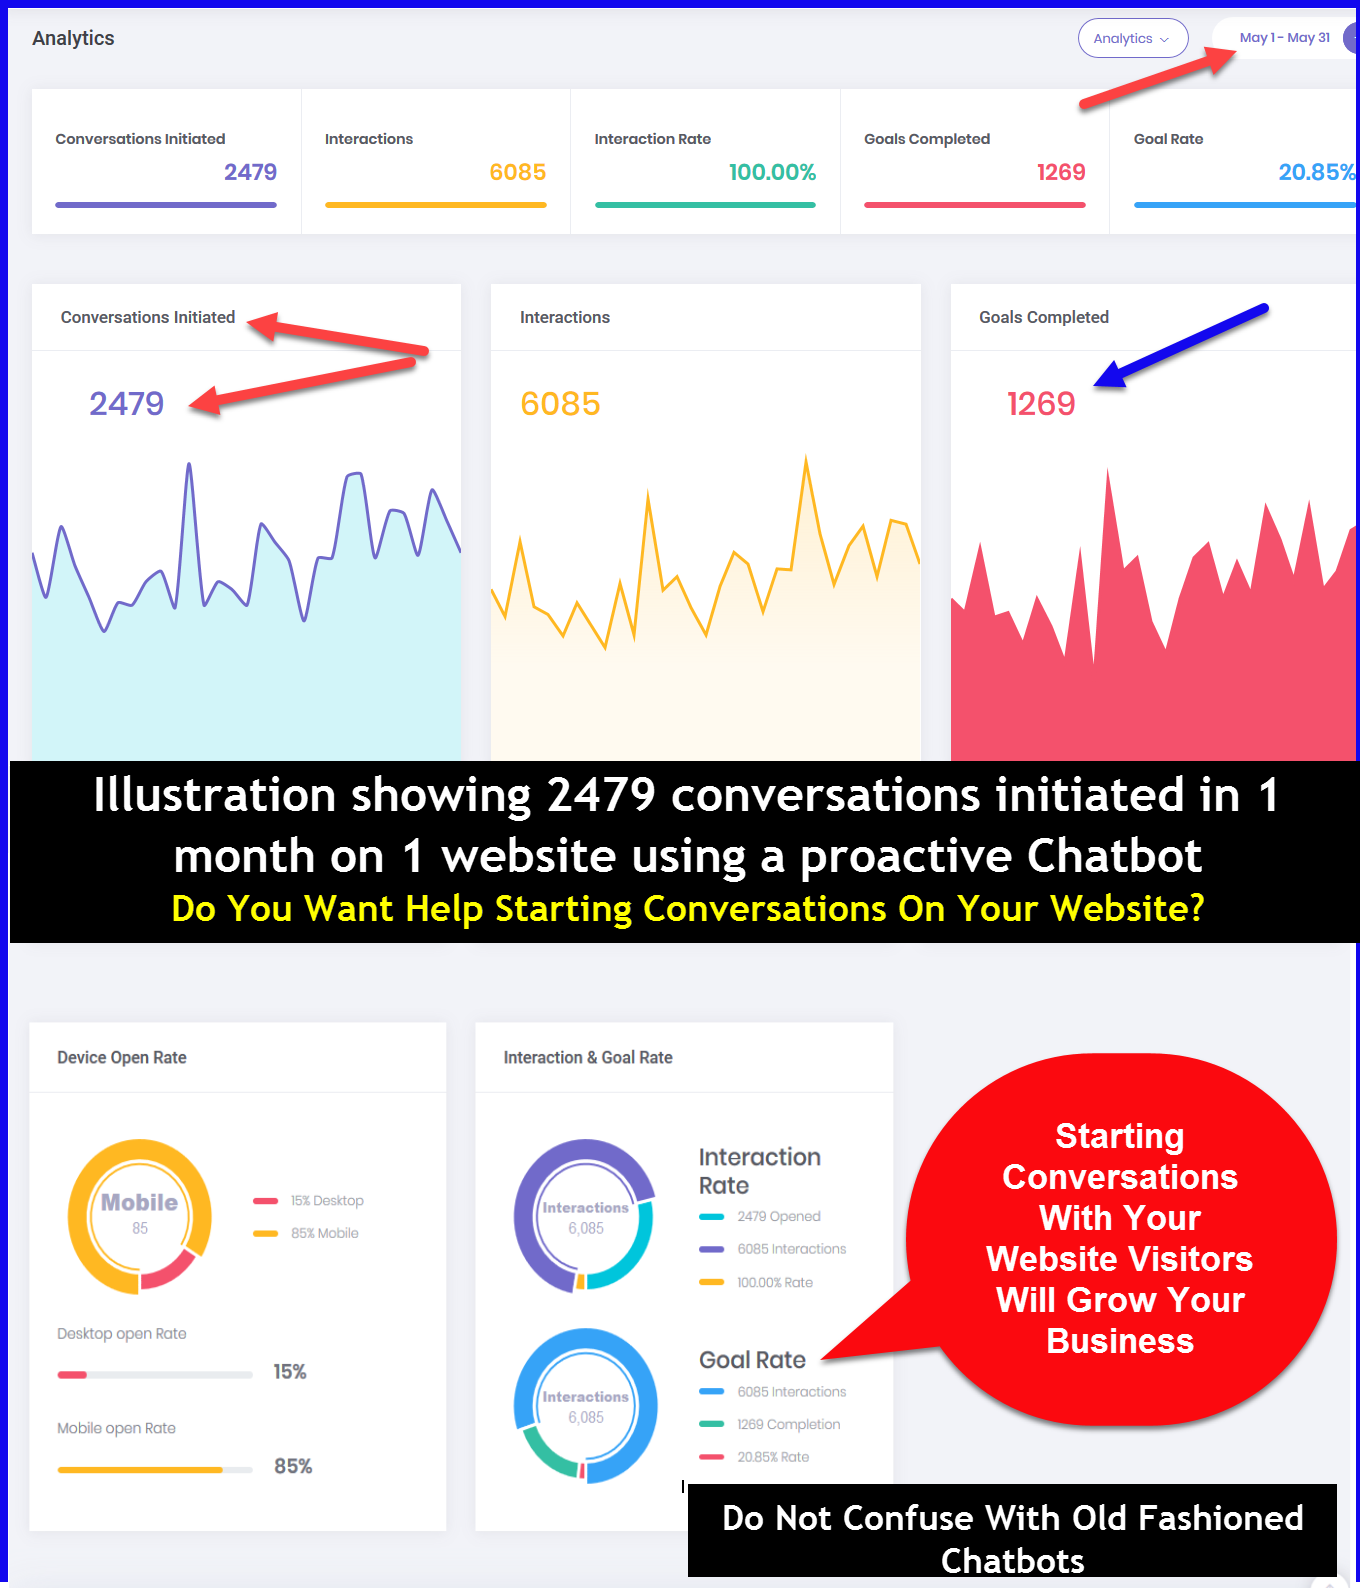 Starting conversations with your website visiors with grow your business